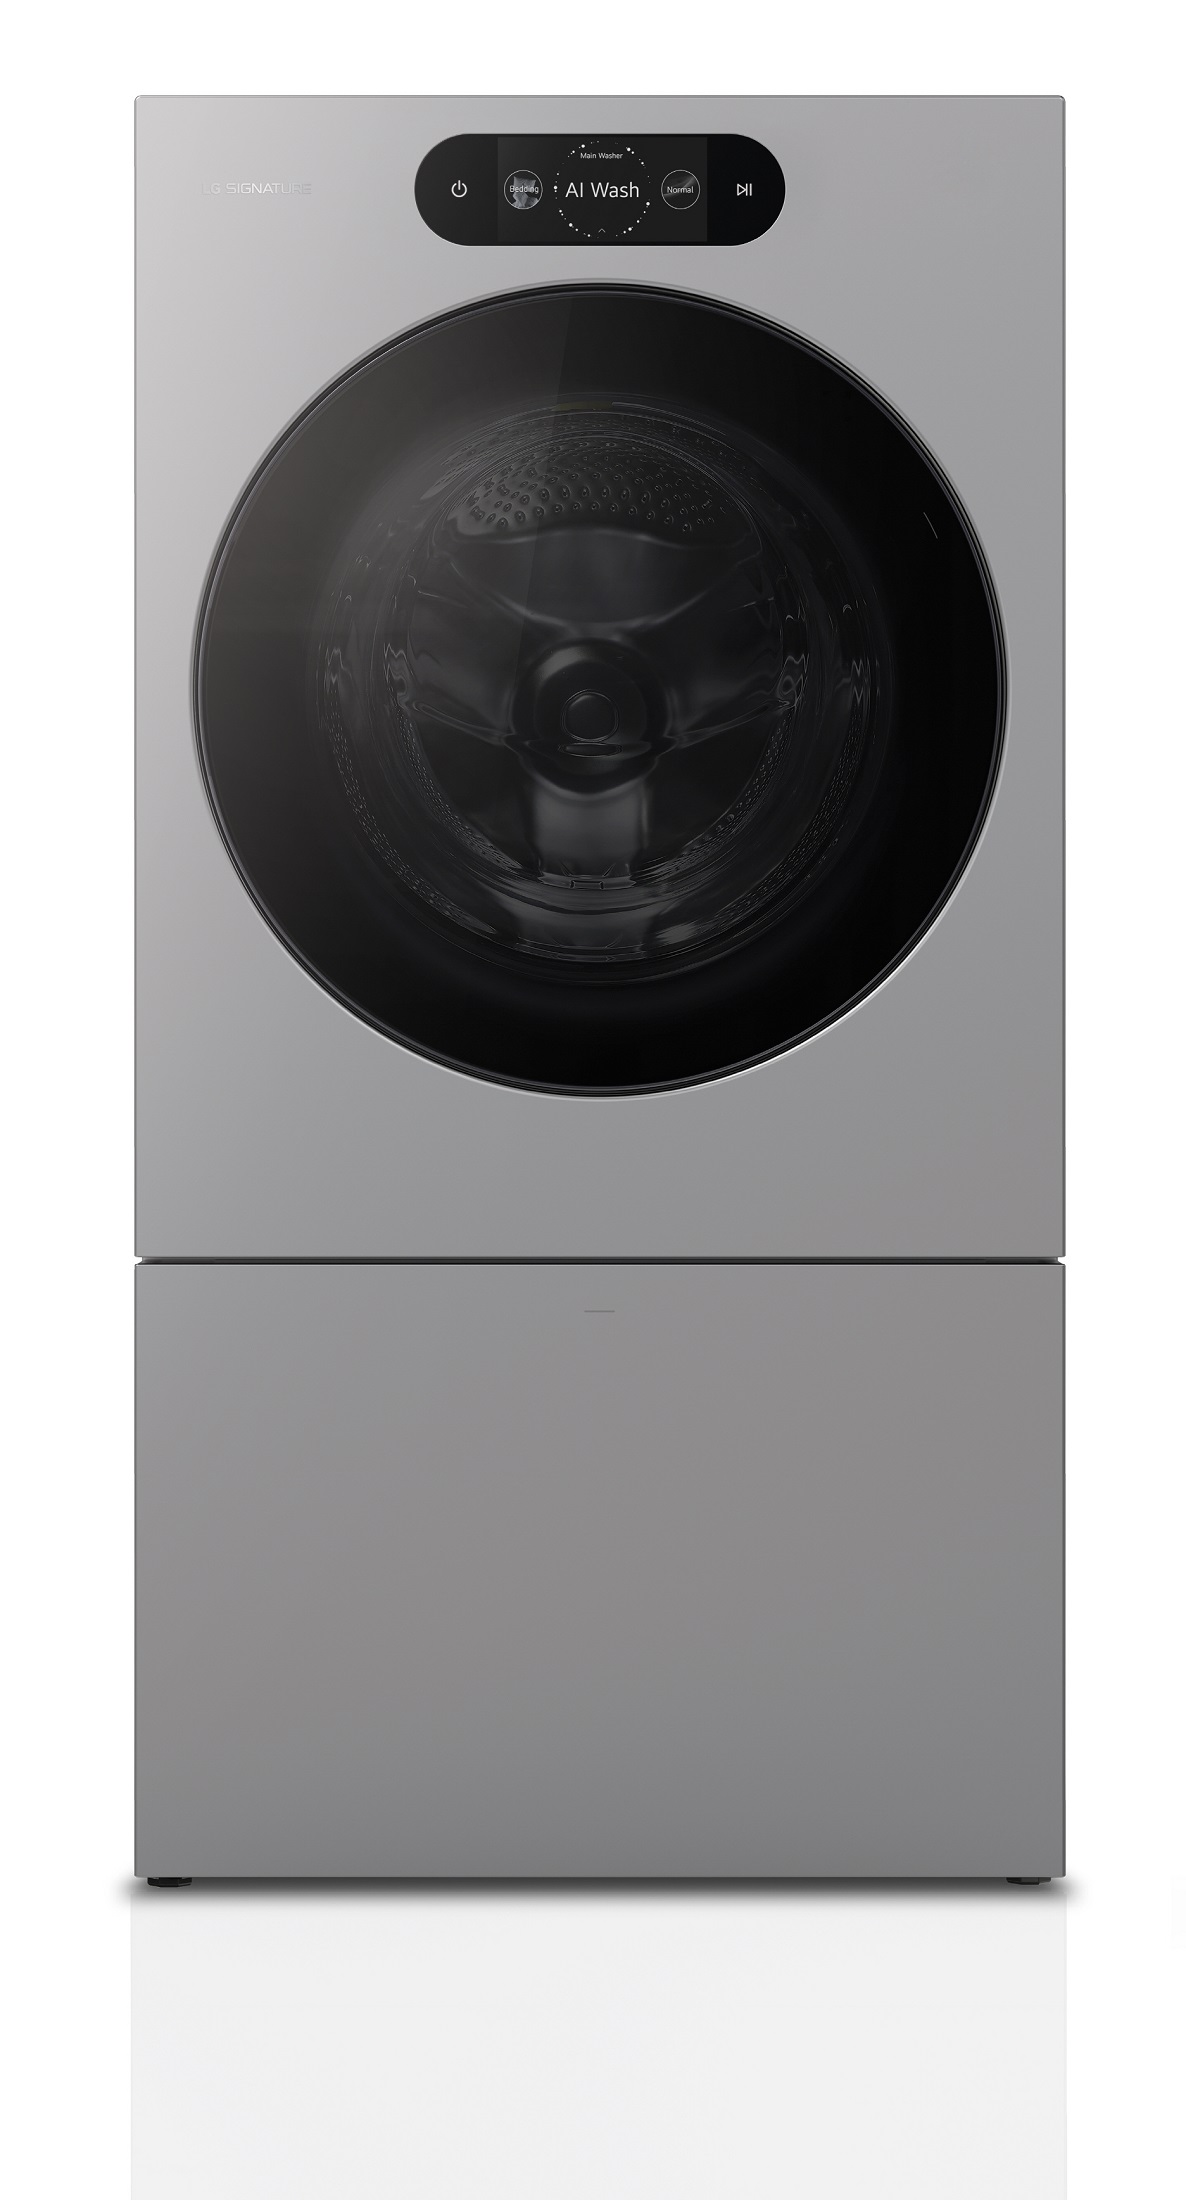 The front view of the new LG SIGNATURE Washer-Dryer with Heat Pump